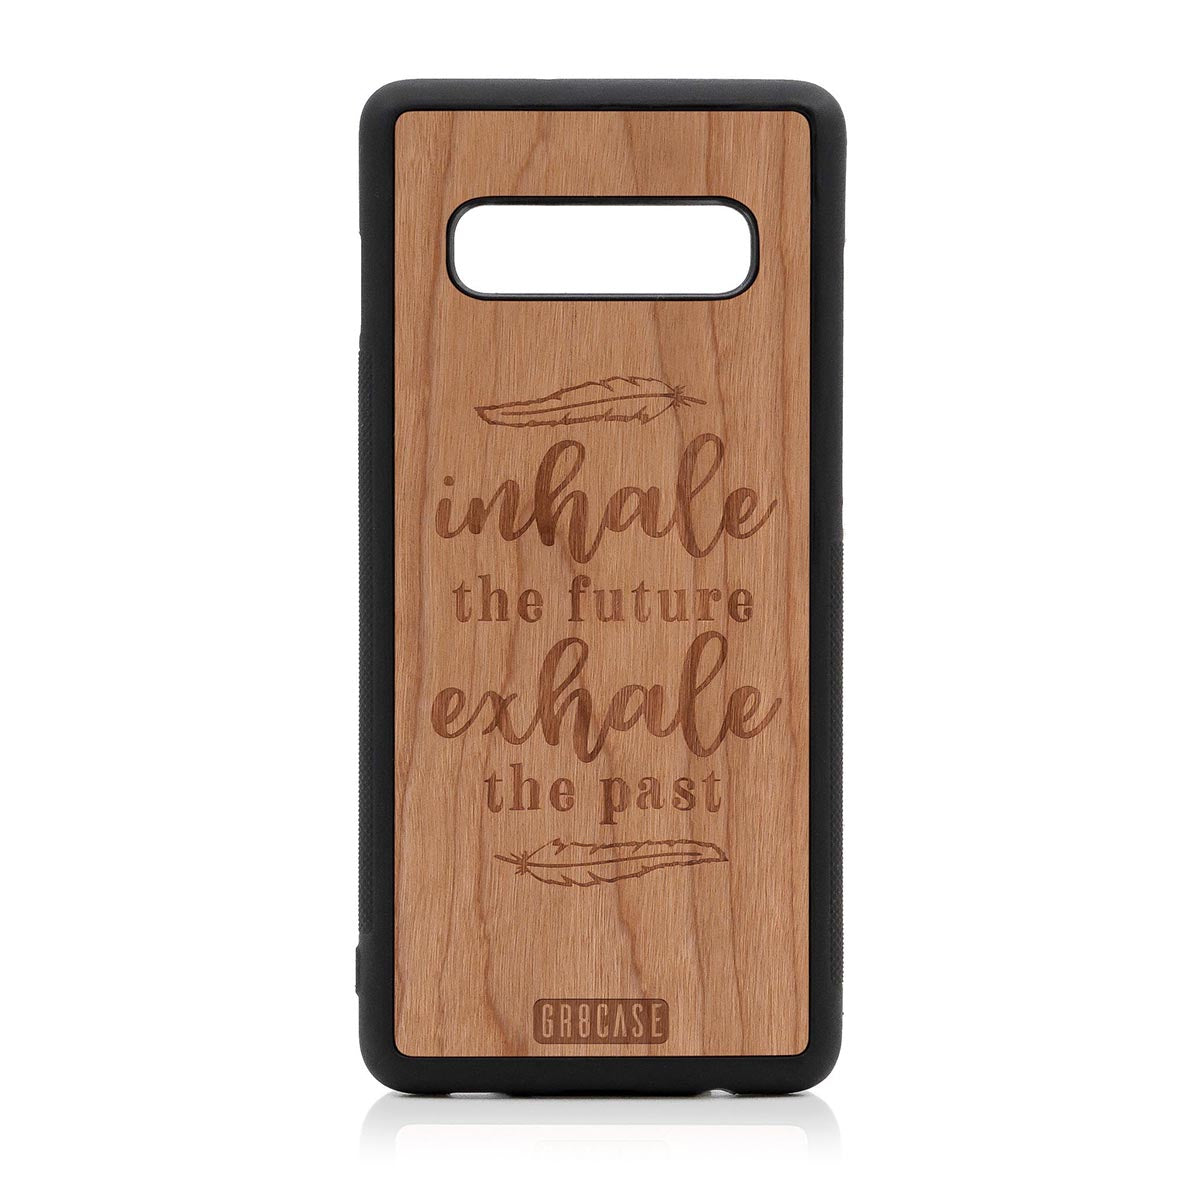 Inhale The Future Exhale The Past Design Wood Case Samsung Galaxy S10 Plus by GR8CASE